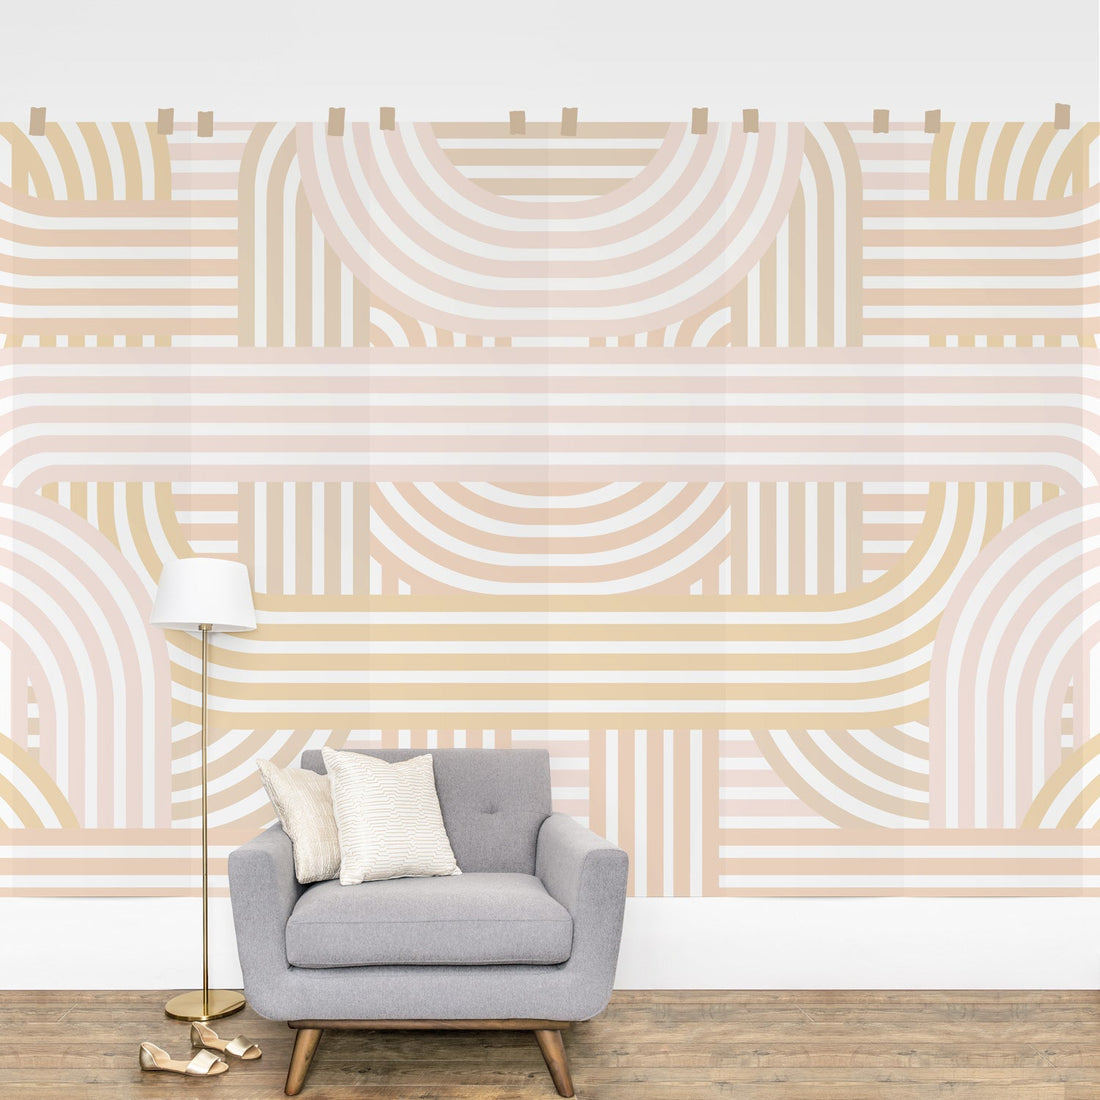 oversized lines pattern wall mural in pastel colors